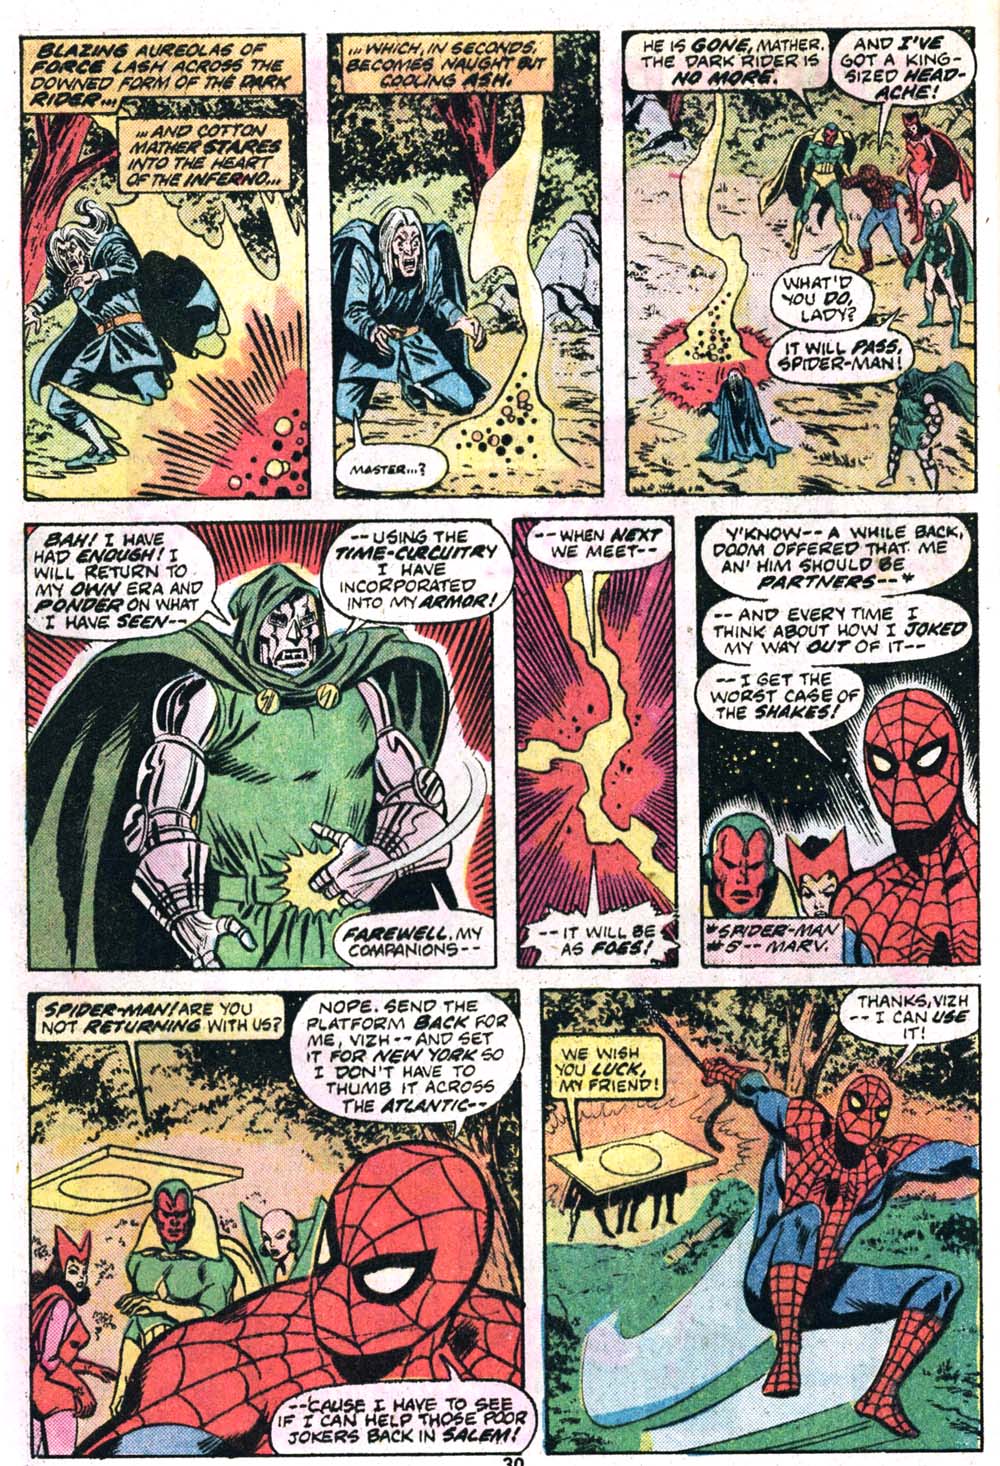 Marvel Team-Up (1972) 44 Page 15